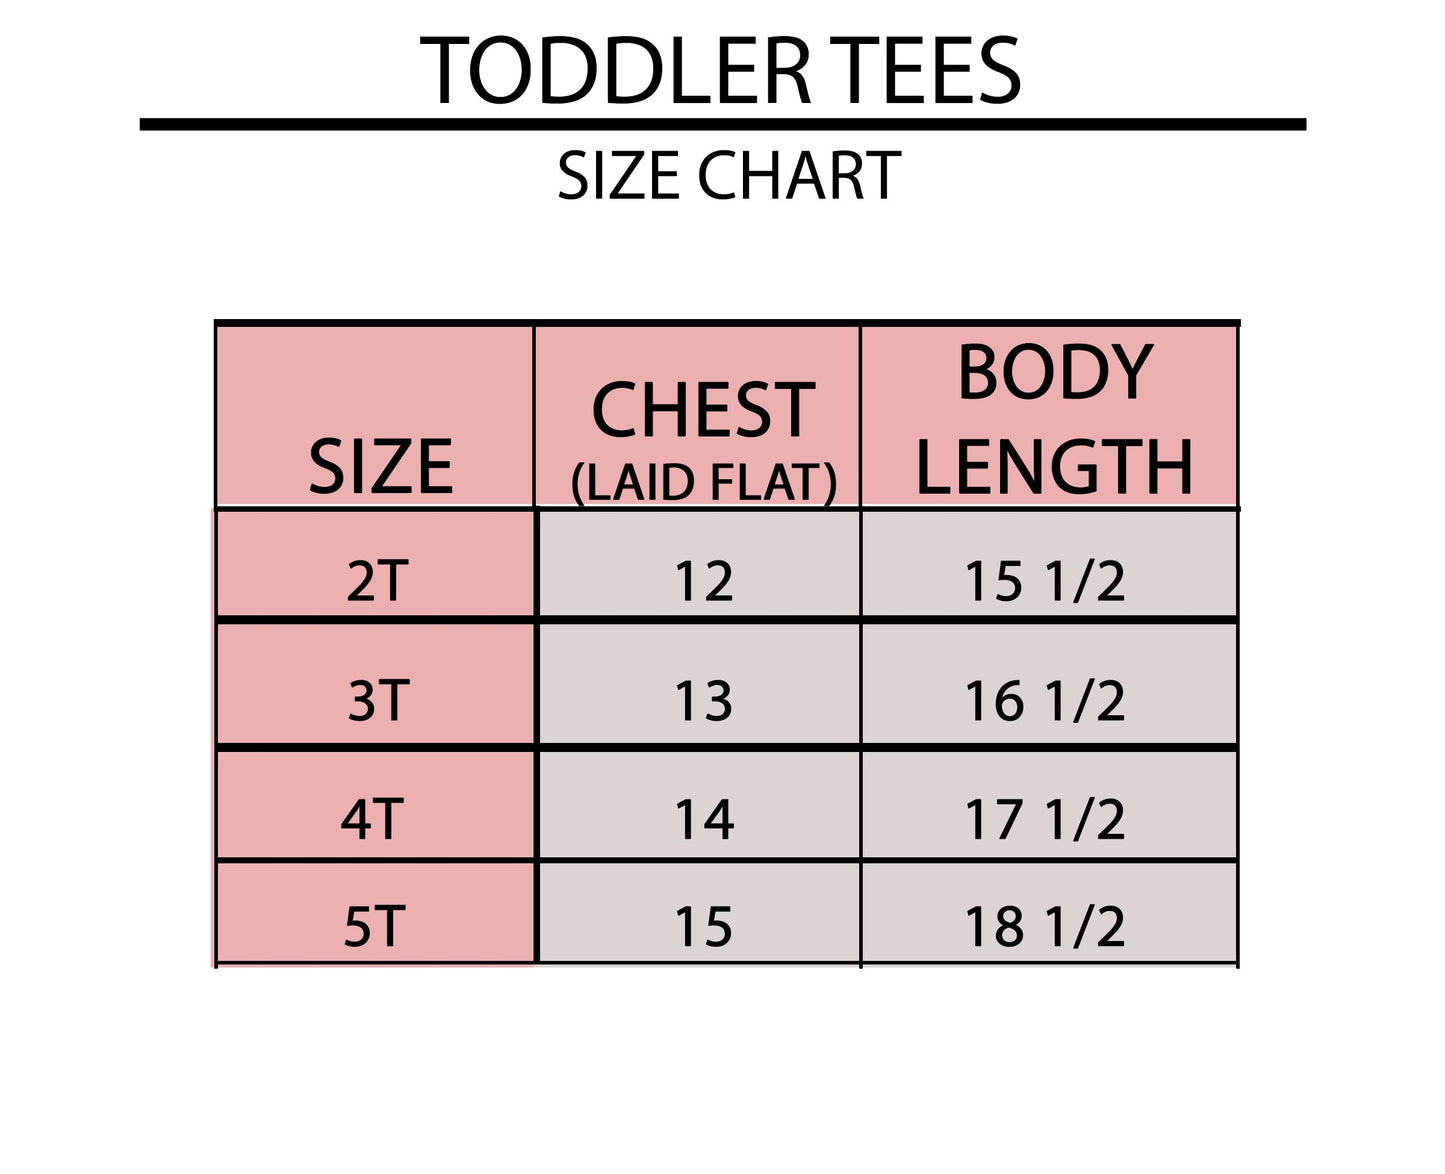 Oh Snap | Toddler Short Sleeve Crew Neck